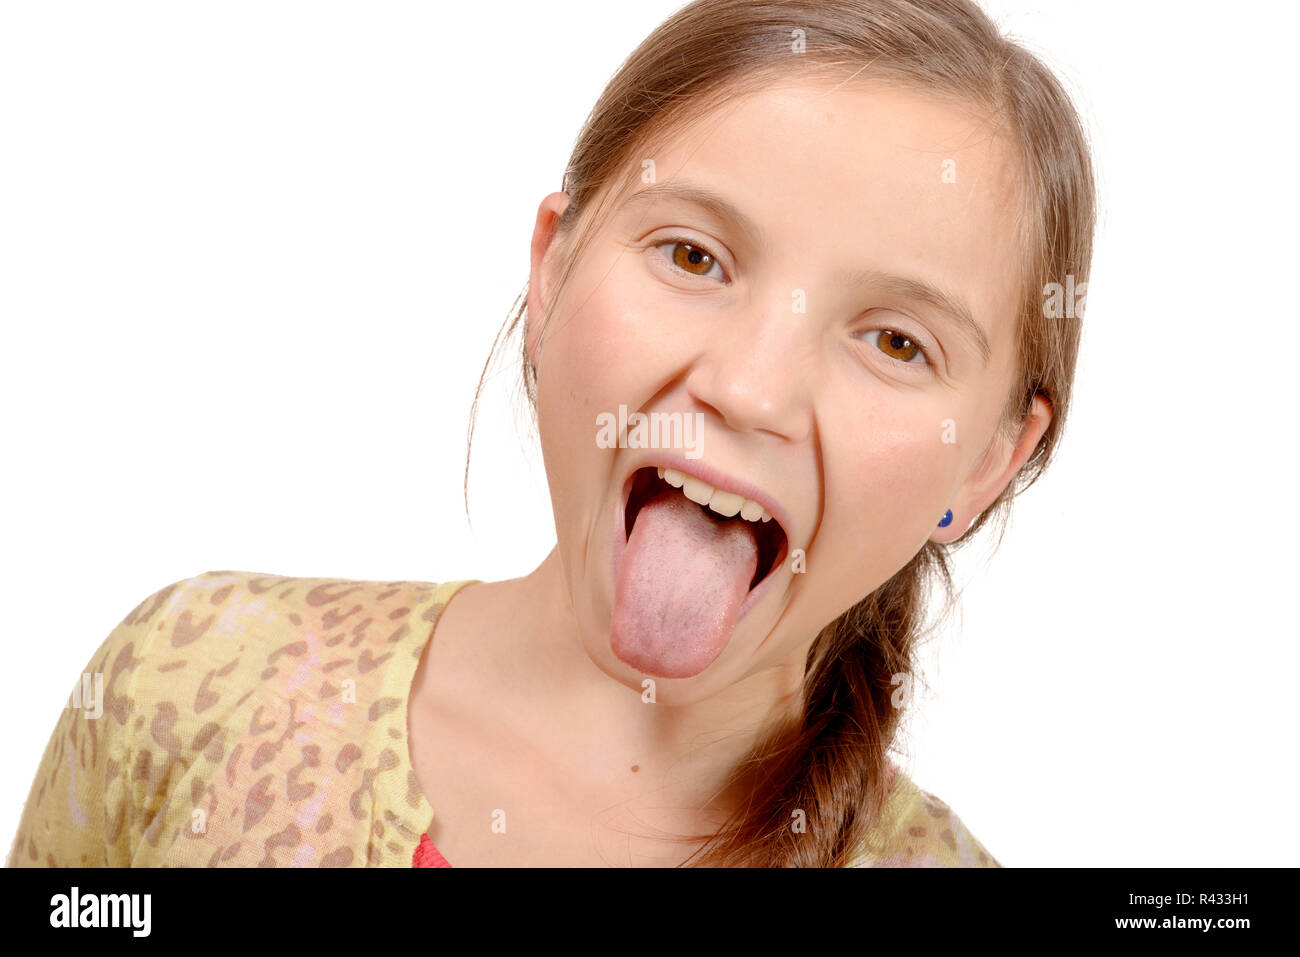 little girl puts out her tongue Stock Photo